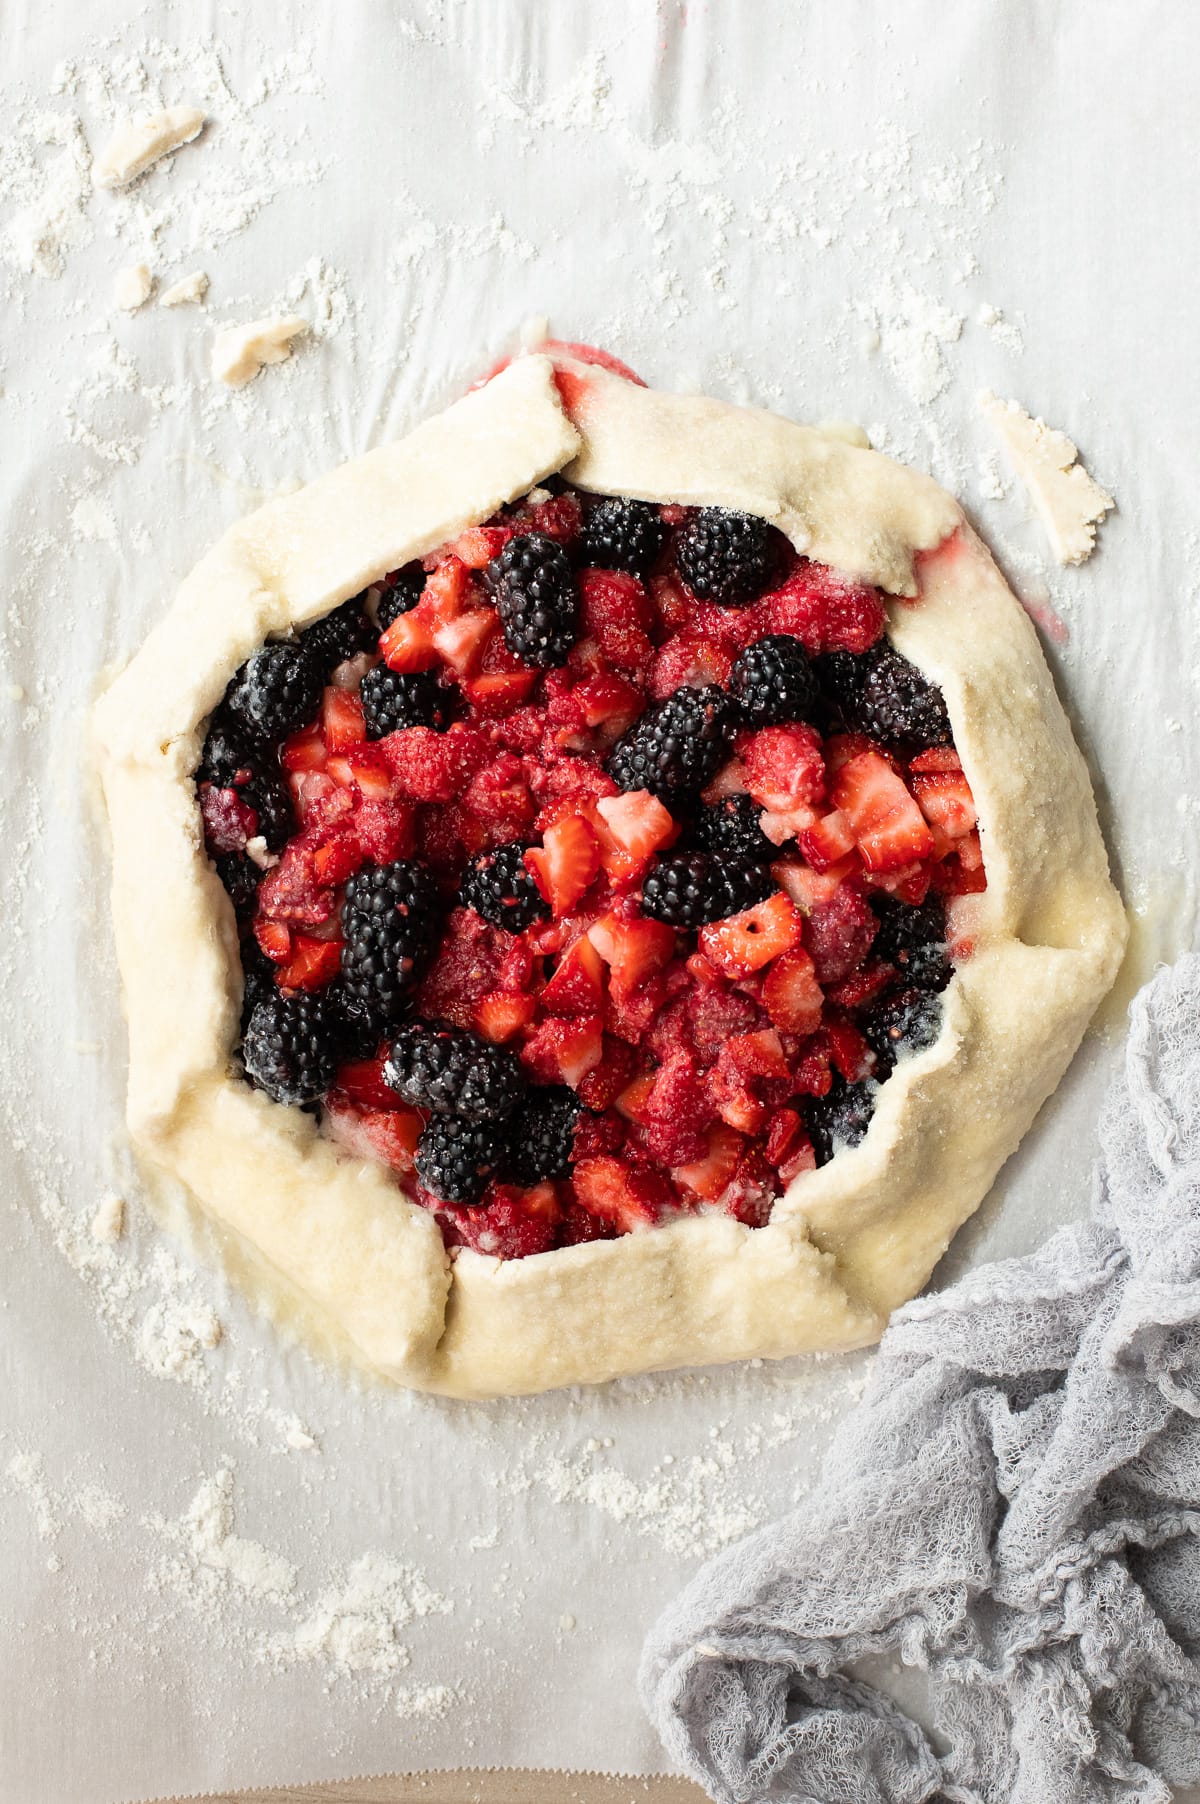 An assembled berry galette, ready to bake.